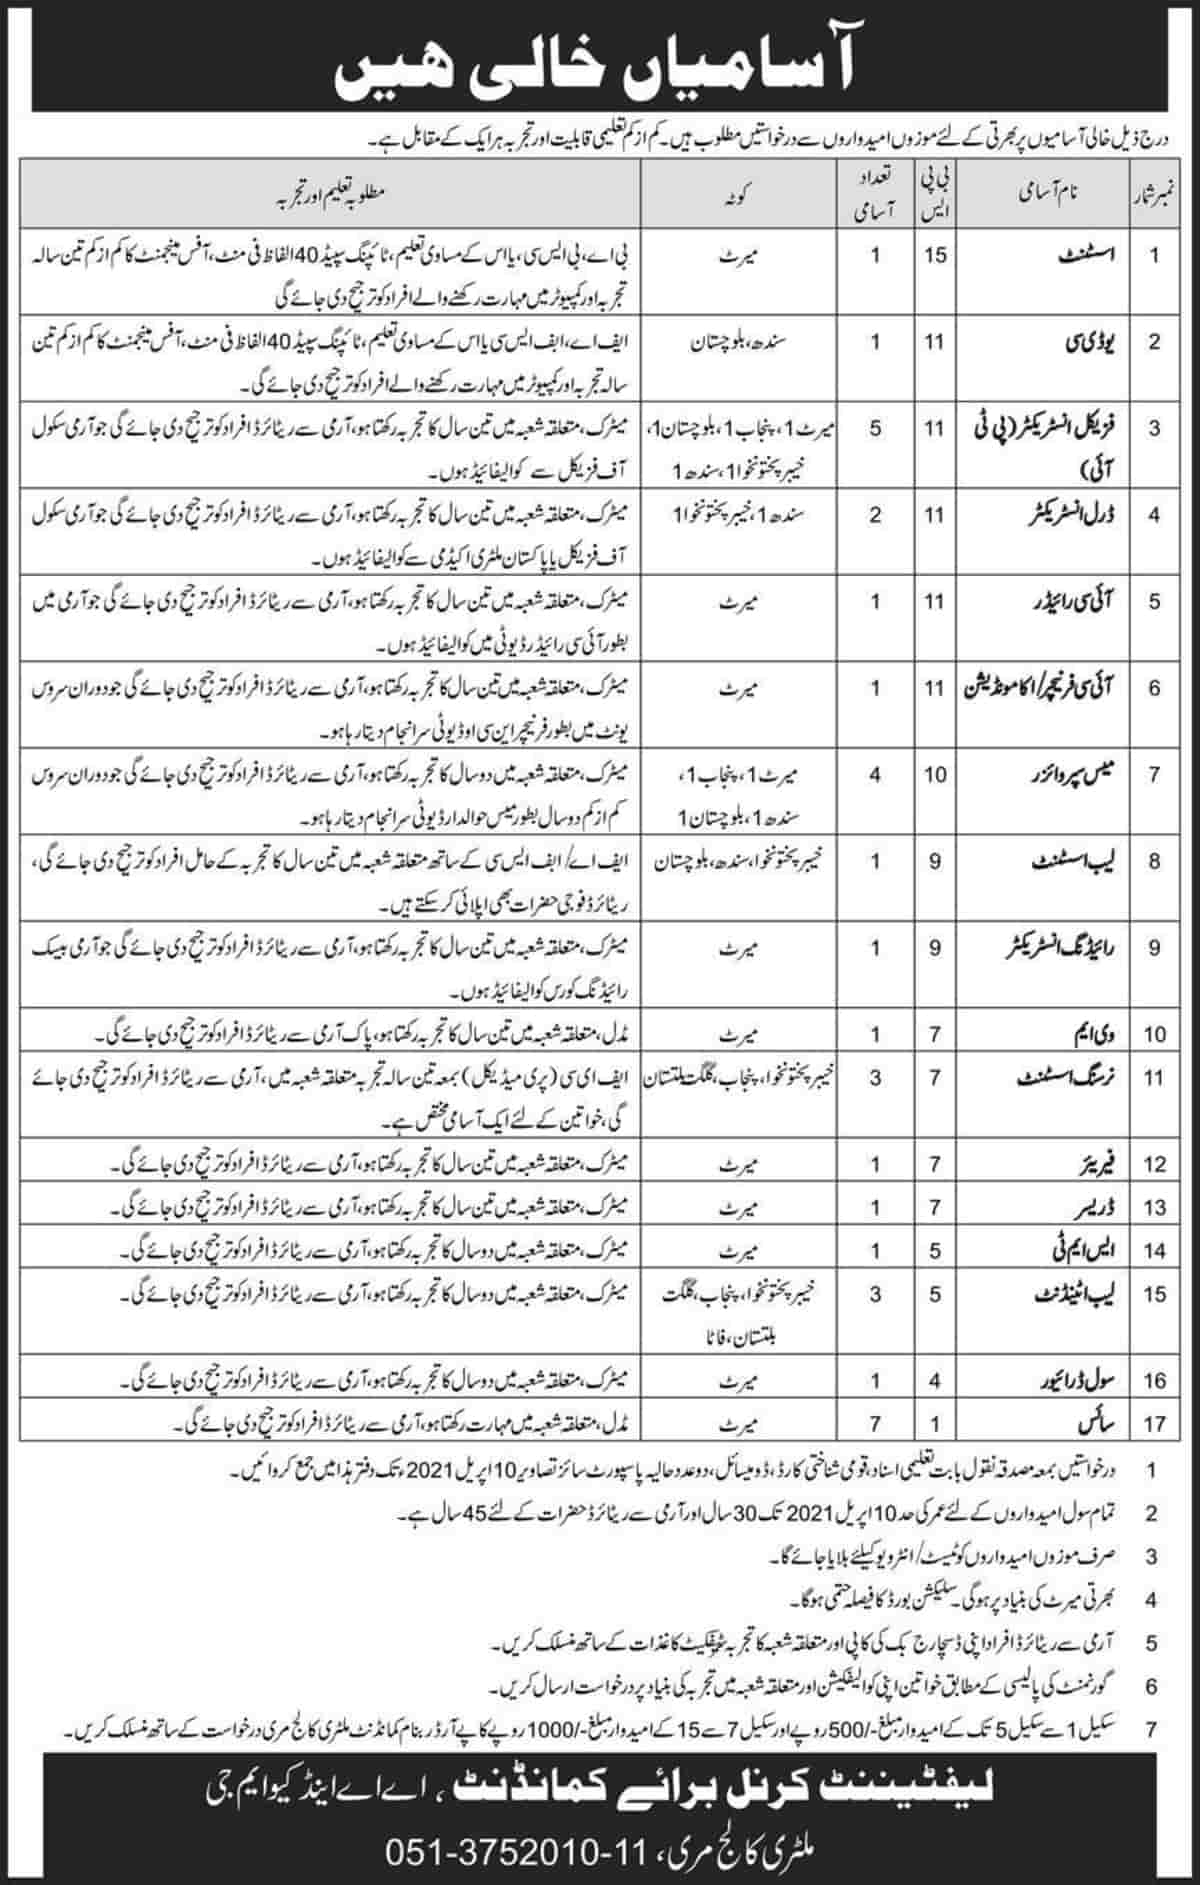 Pakistan Army Military College Murree Jobs 2021 Application Form